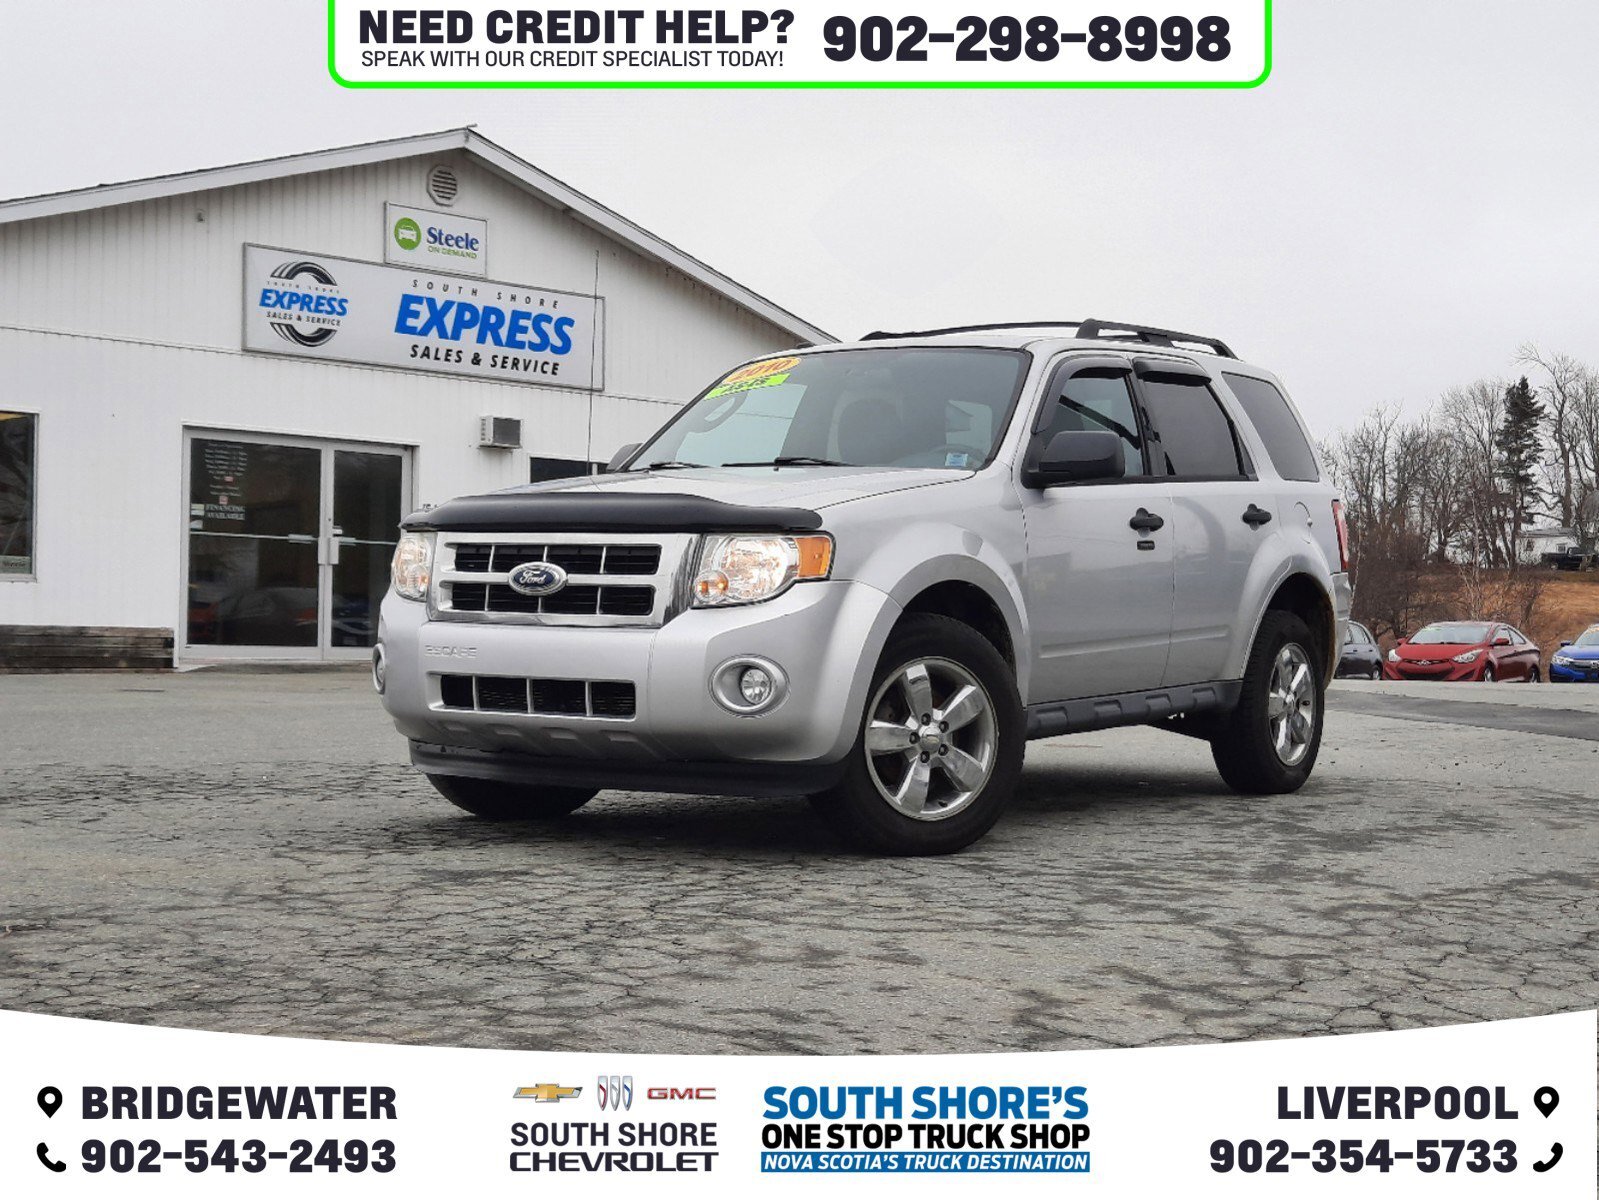 2010 Ford Escape 4WD 4dr V6 Auto XLT